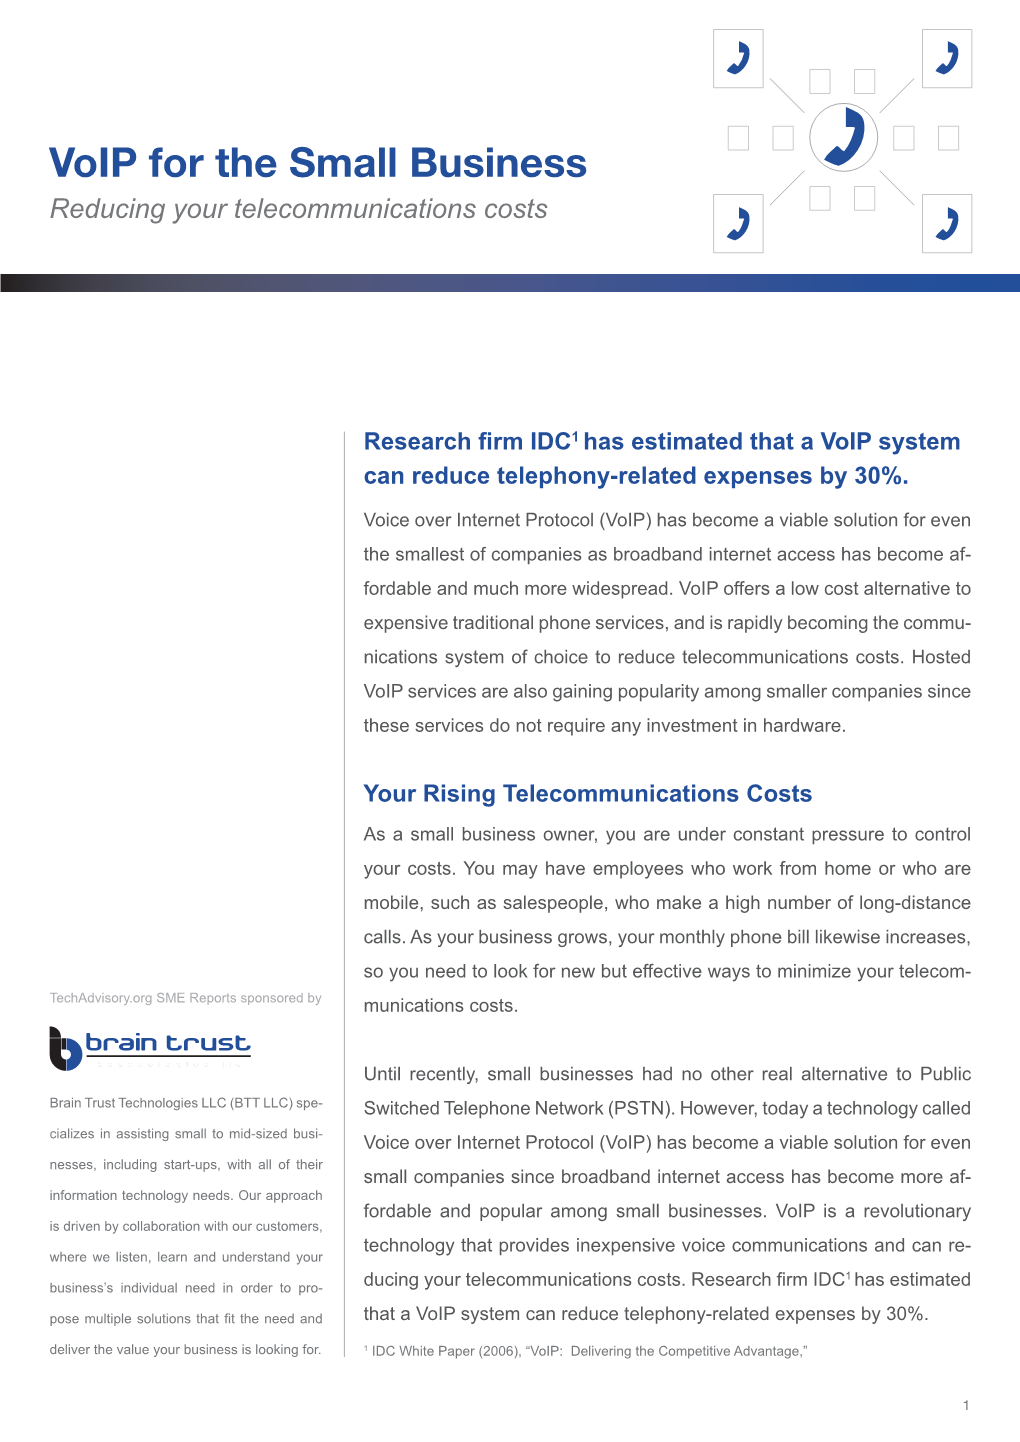 Voip for the Small Business Reducing Your Telecommunications Costs